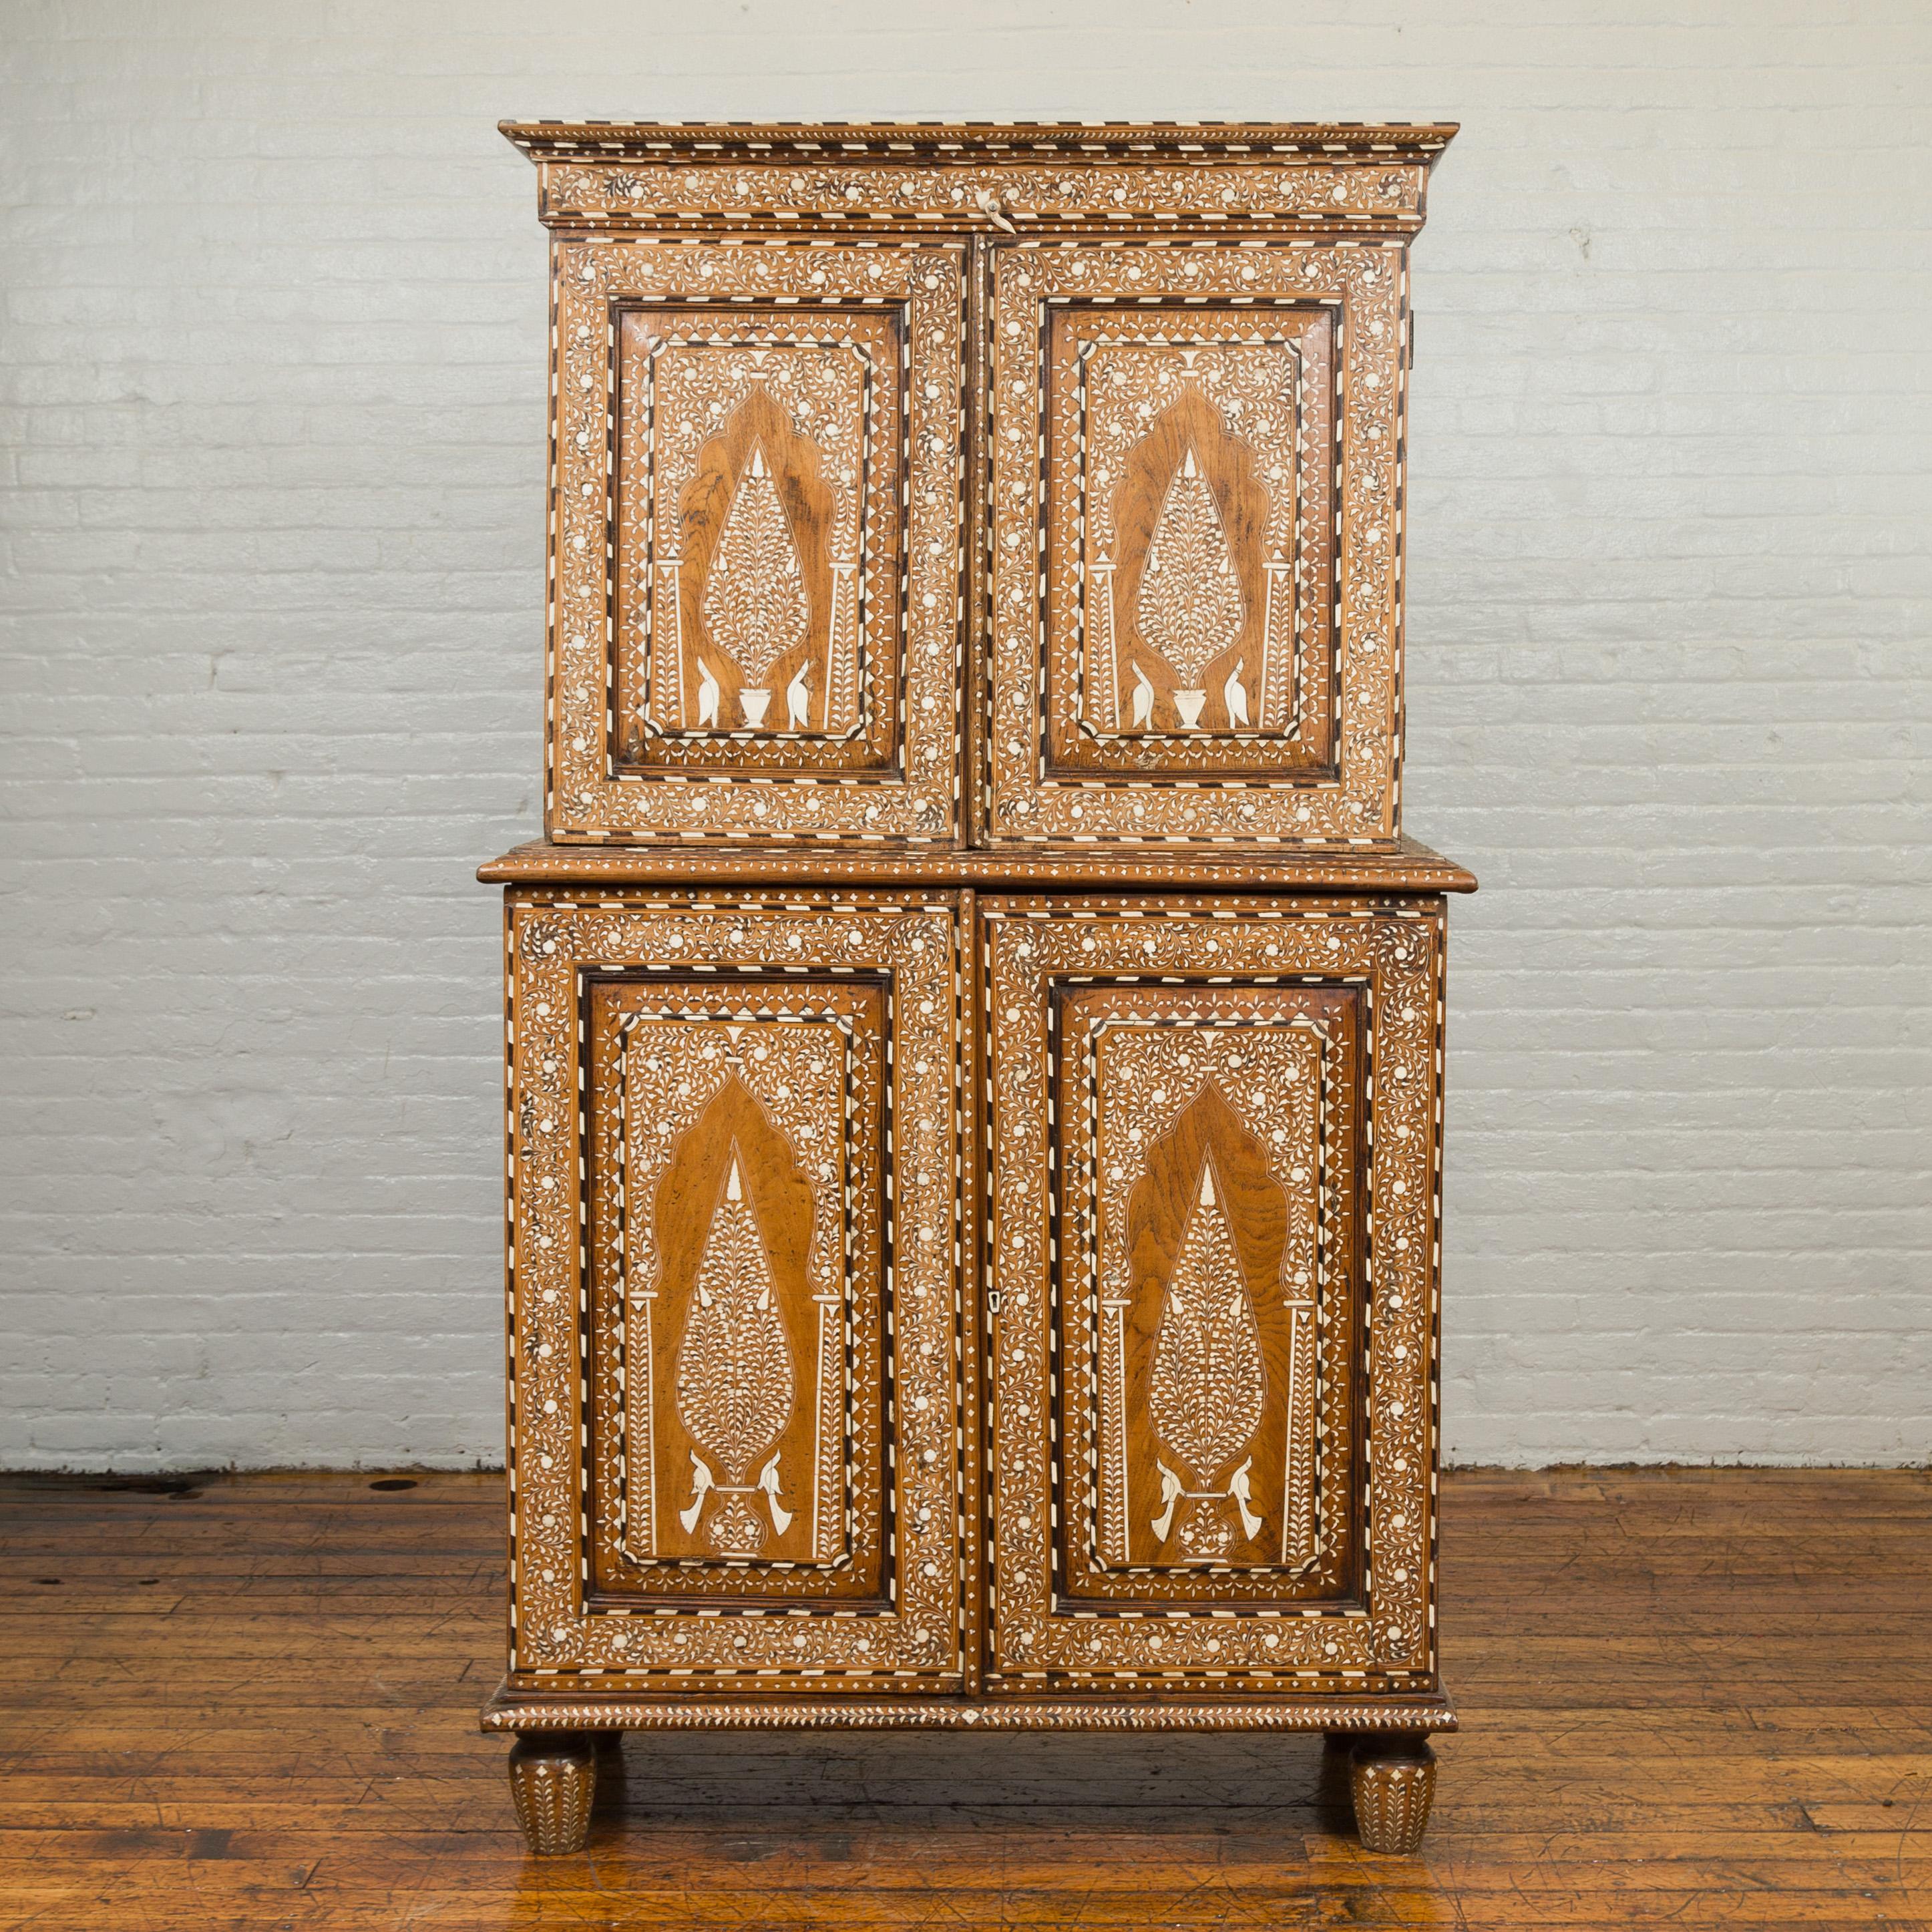 A vintage Anglo-Indian sheesham wood wardrobe cabinet from the first half of the 20th century, with birds flanking a tree, ebonized accents and bone inlay. Born in India during the 1940s, this two-section cabinet is adorned with an abundant décor of